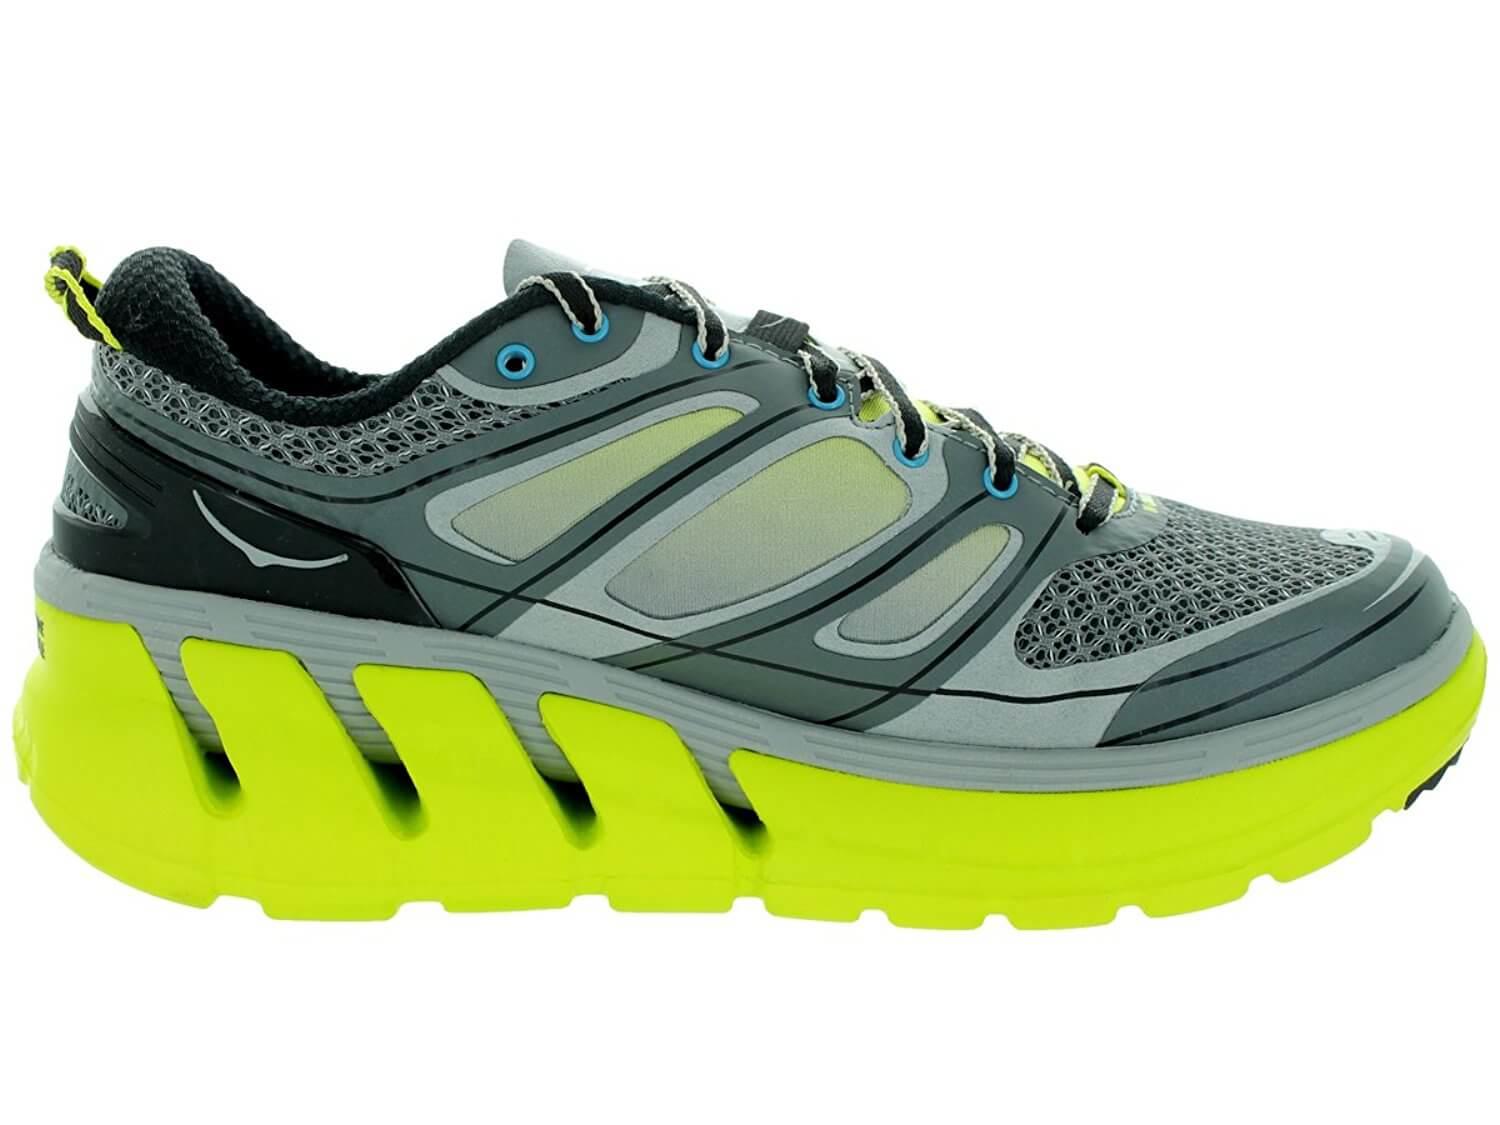 the Hoka One One Conquest 2 shown from the side